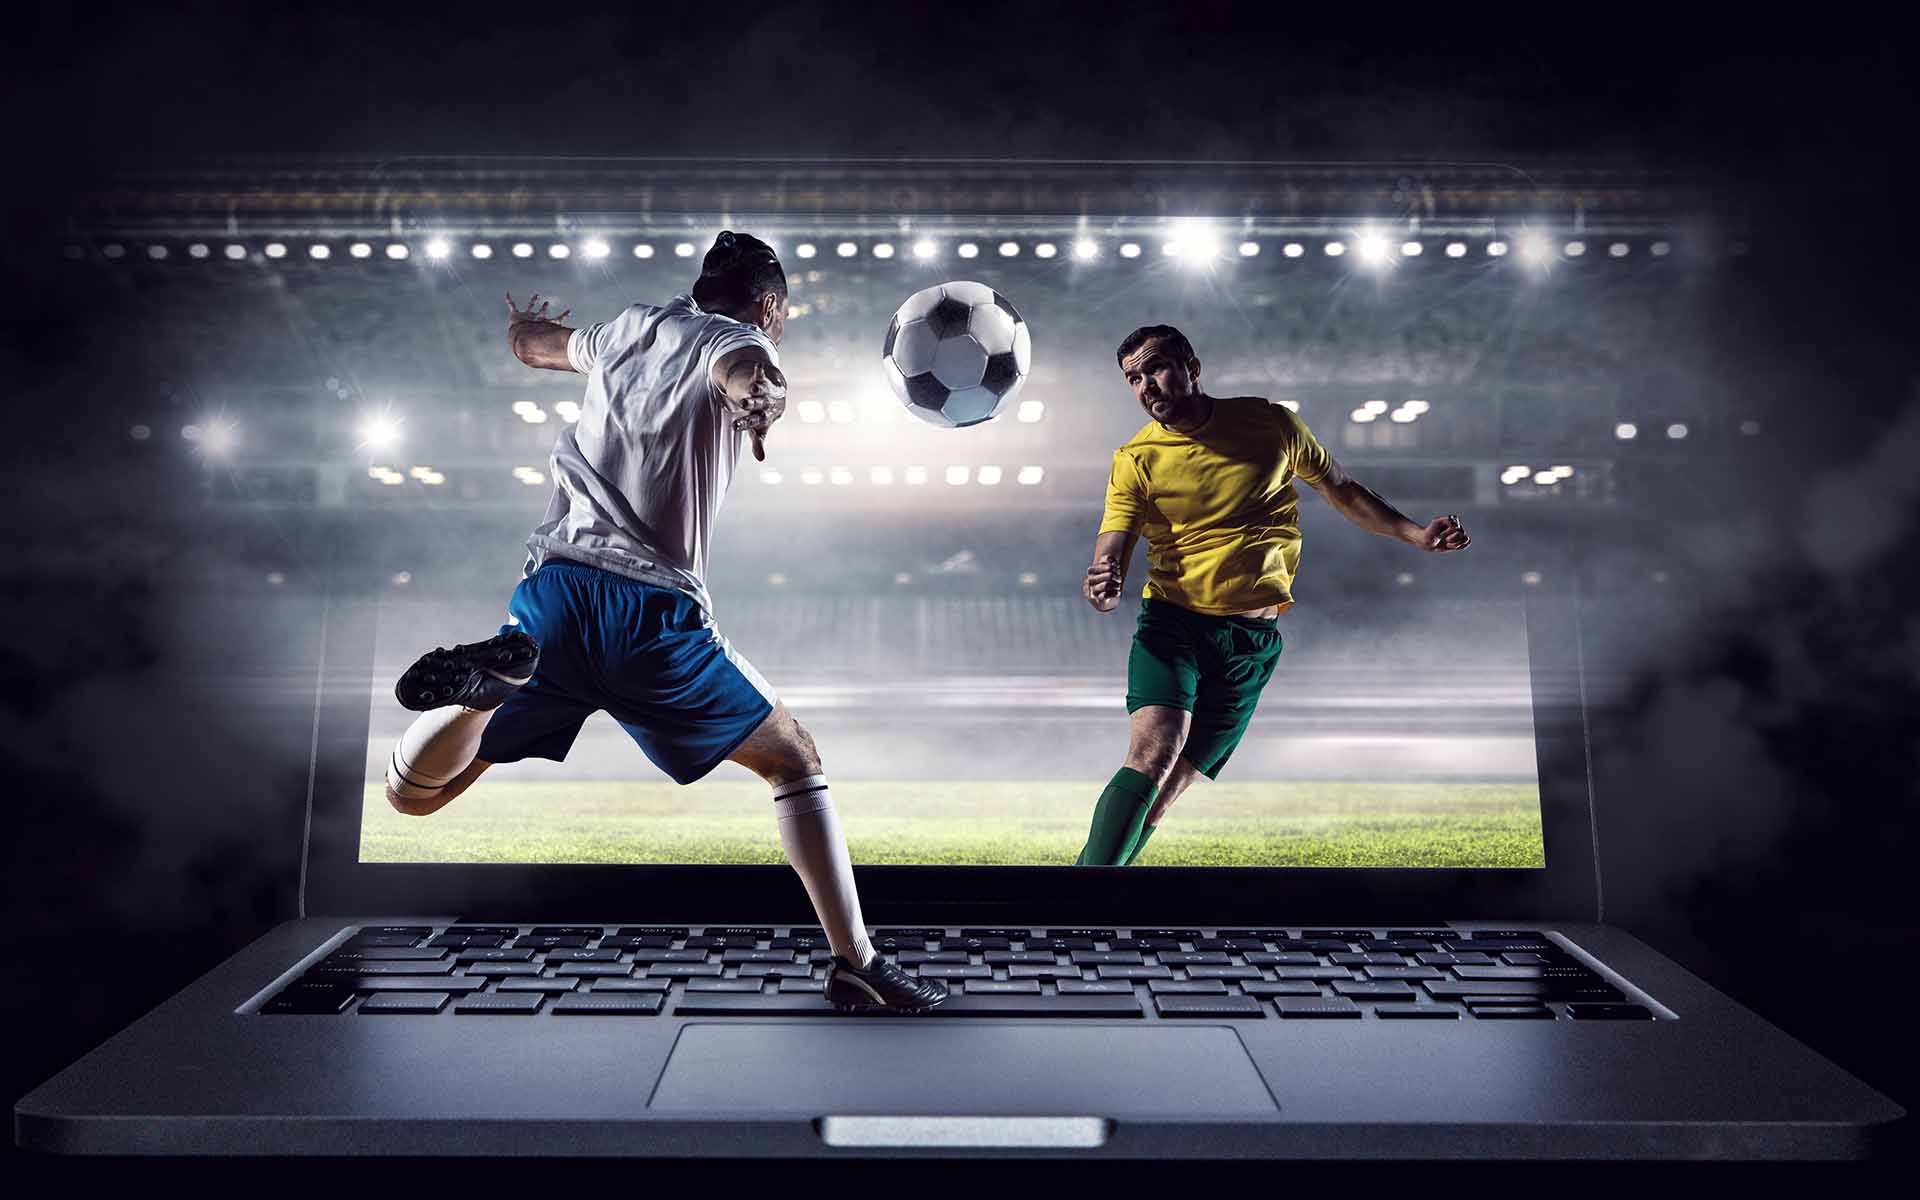 forums betting advice on sports